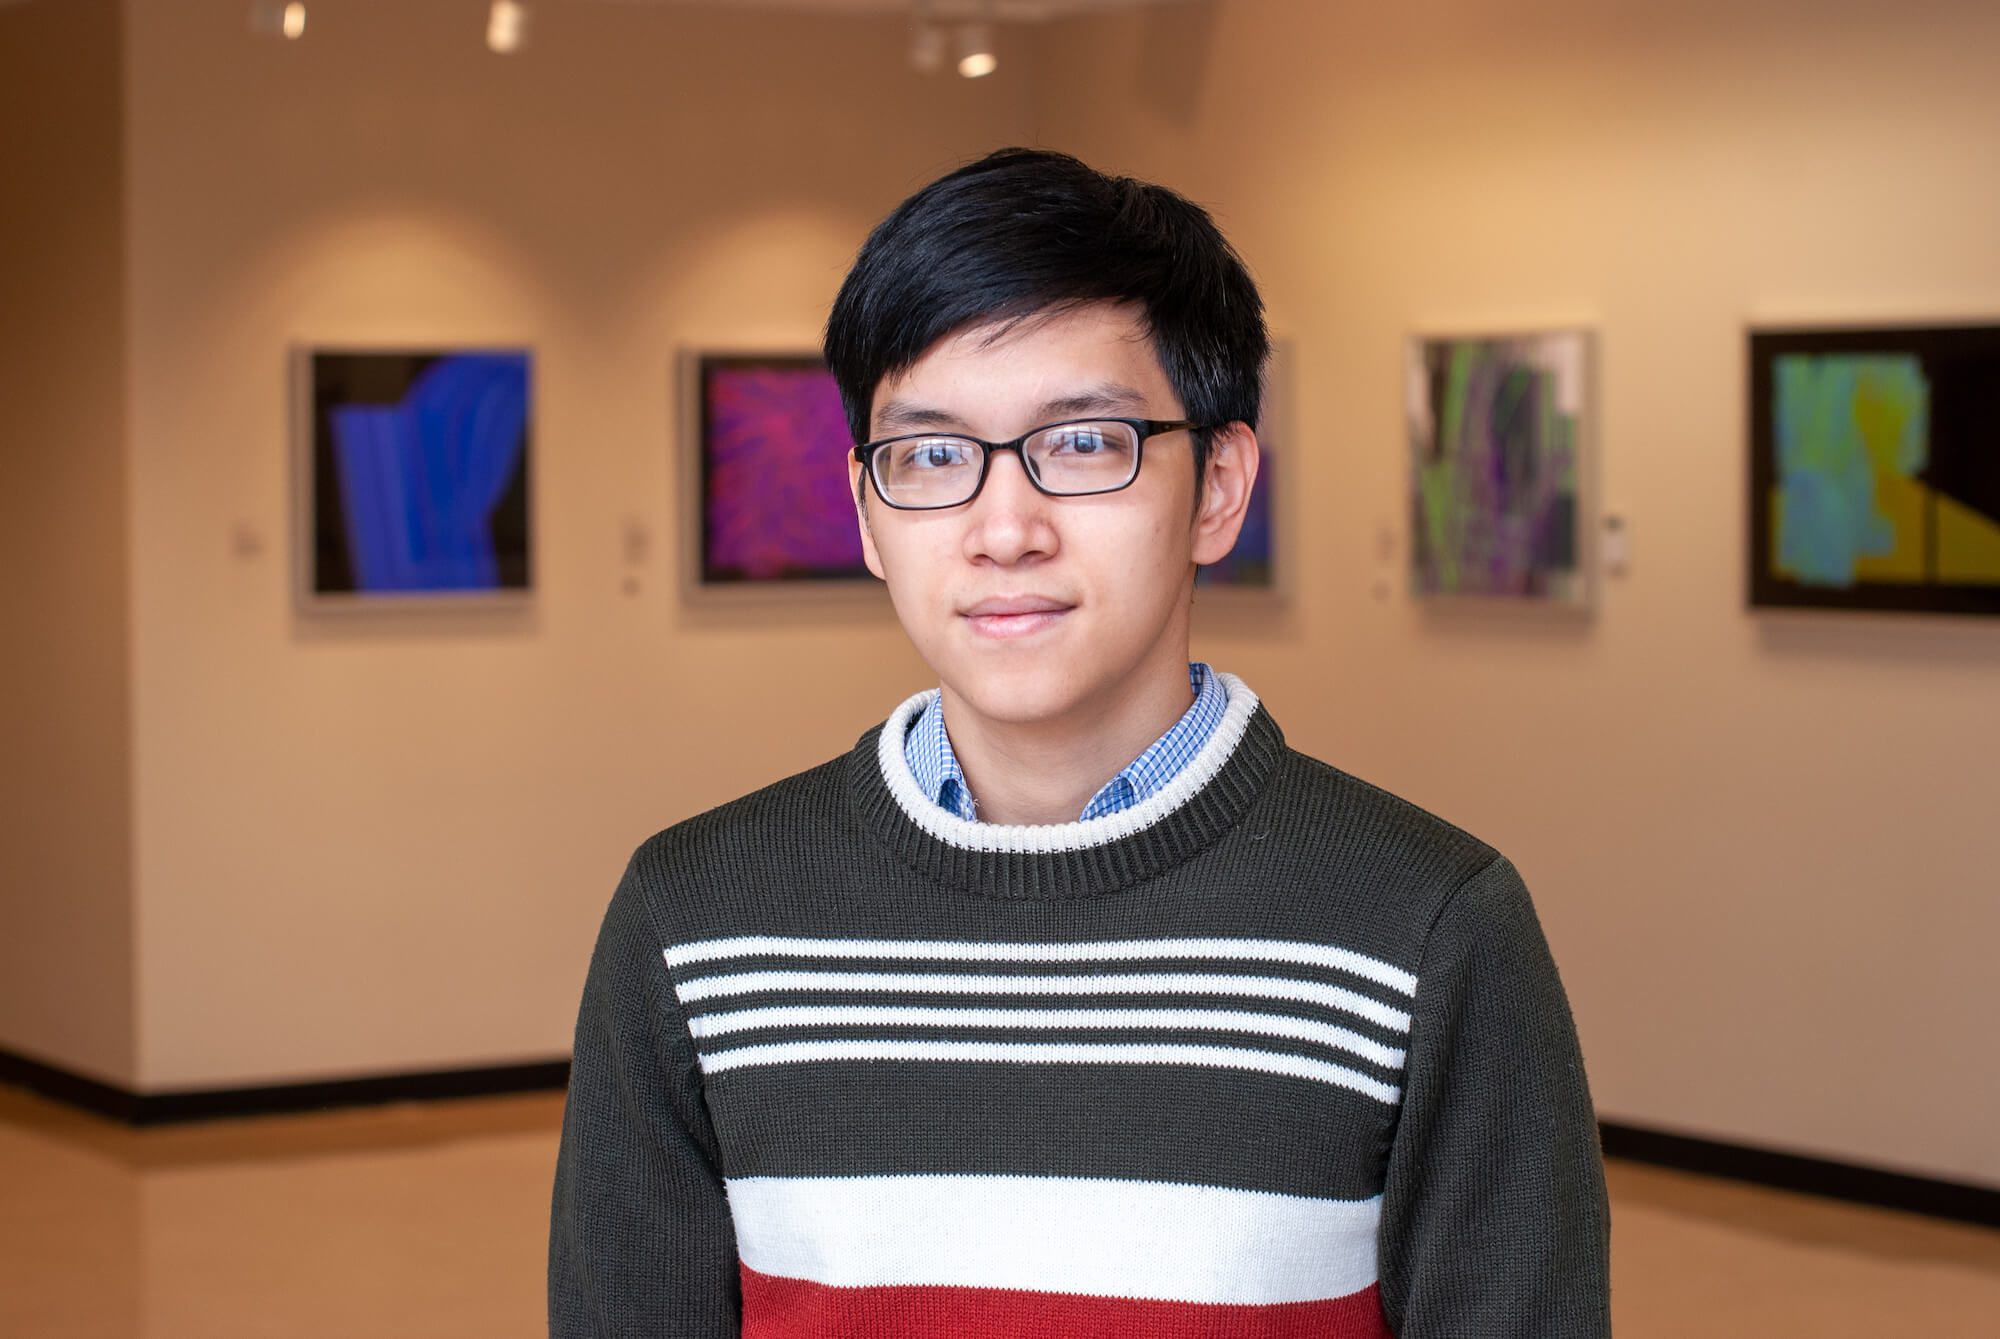 Trung Dang received an honorable recognition from the CRA for the 2023 Outstanding Undergraduate Researcher competition.